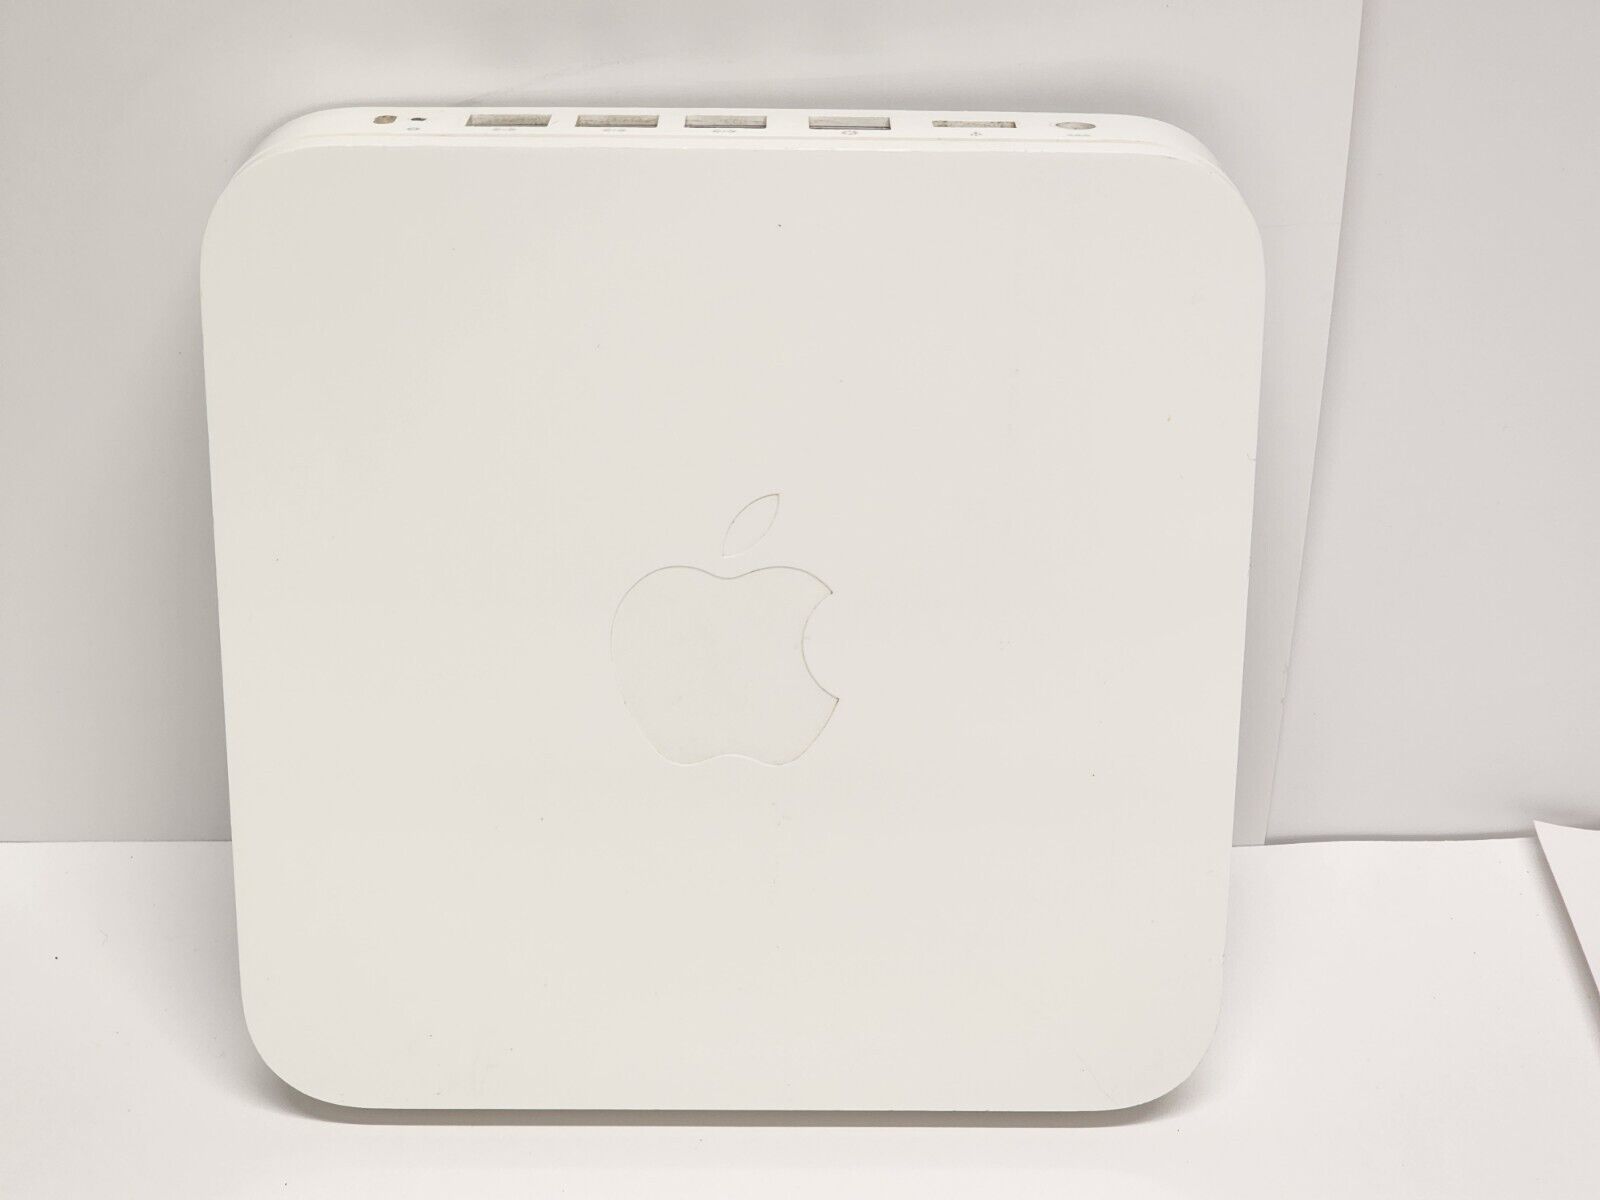 Apple A1143 AirPort Extreme Base Station No Power Cable Free Fast Shipping